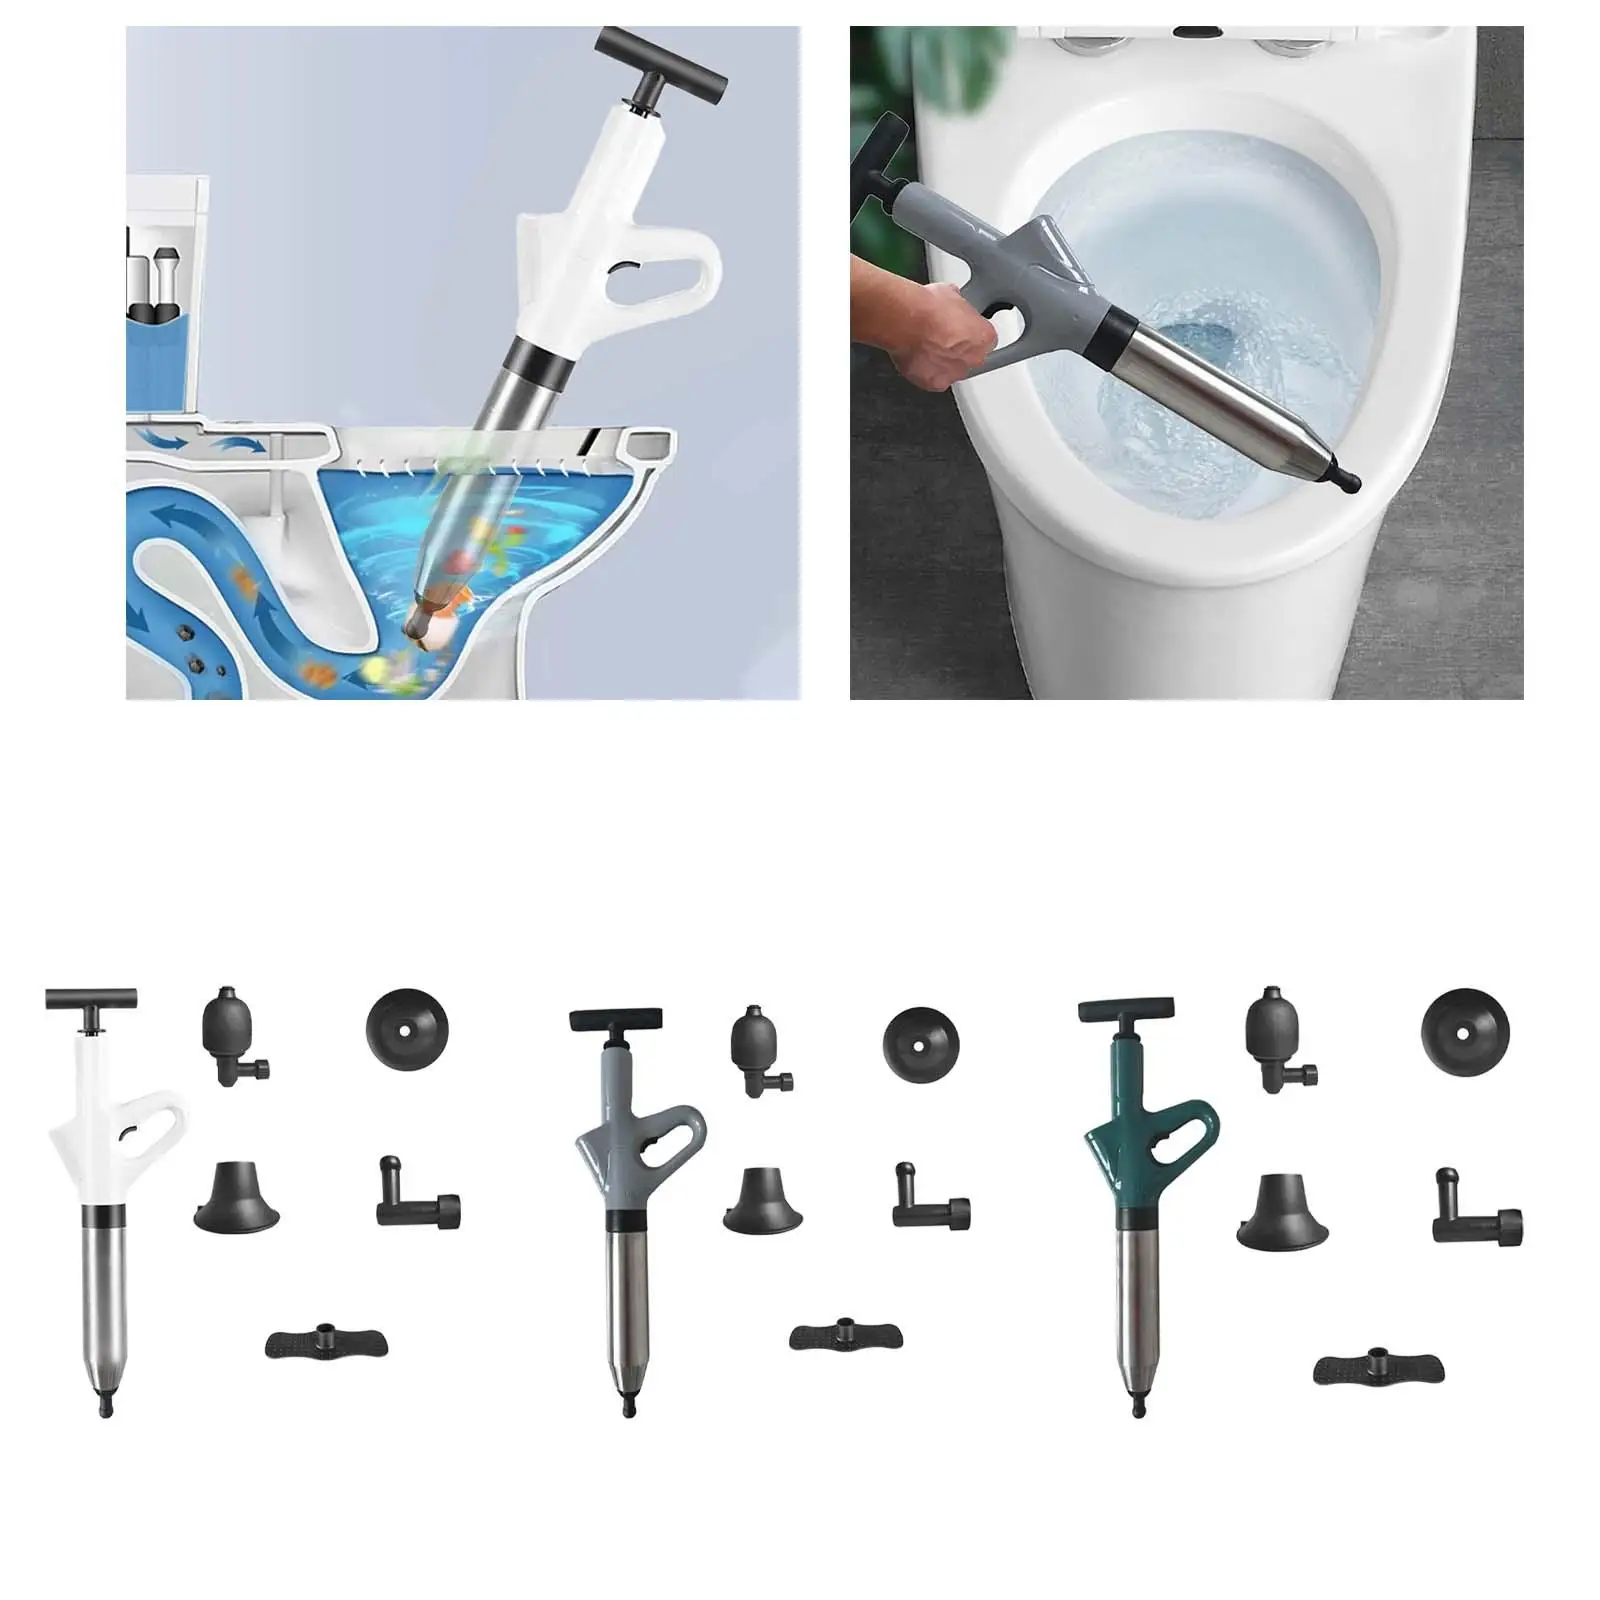 Toilet Plunger Manual Sink Plungers for Washbasin Clogged Toilet Bathtub